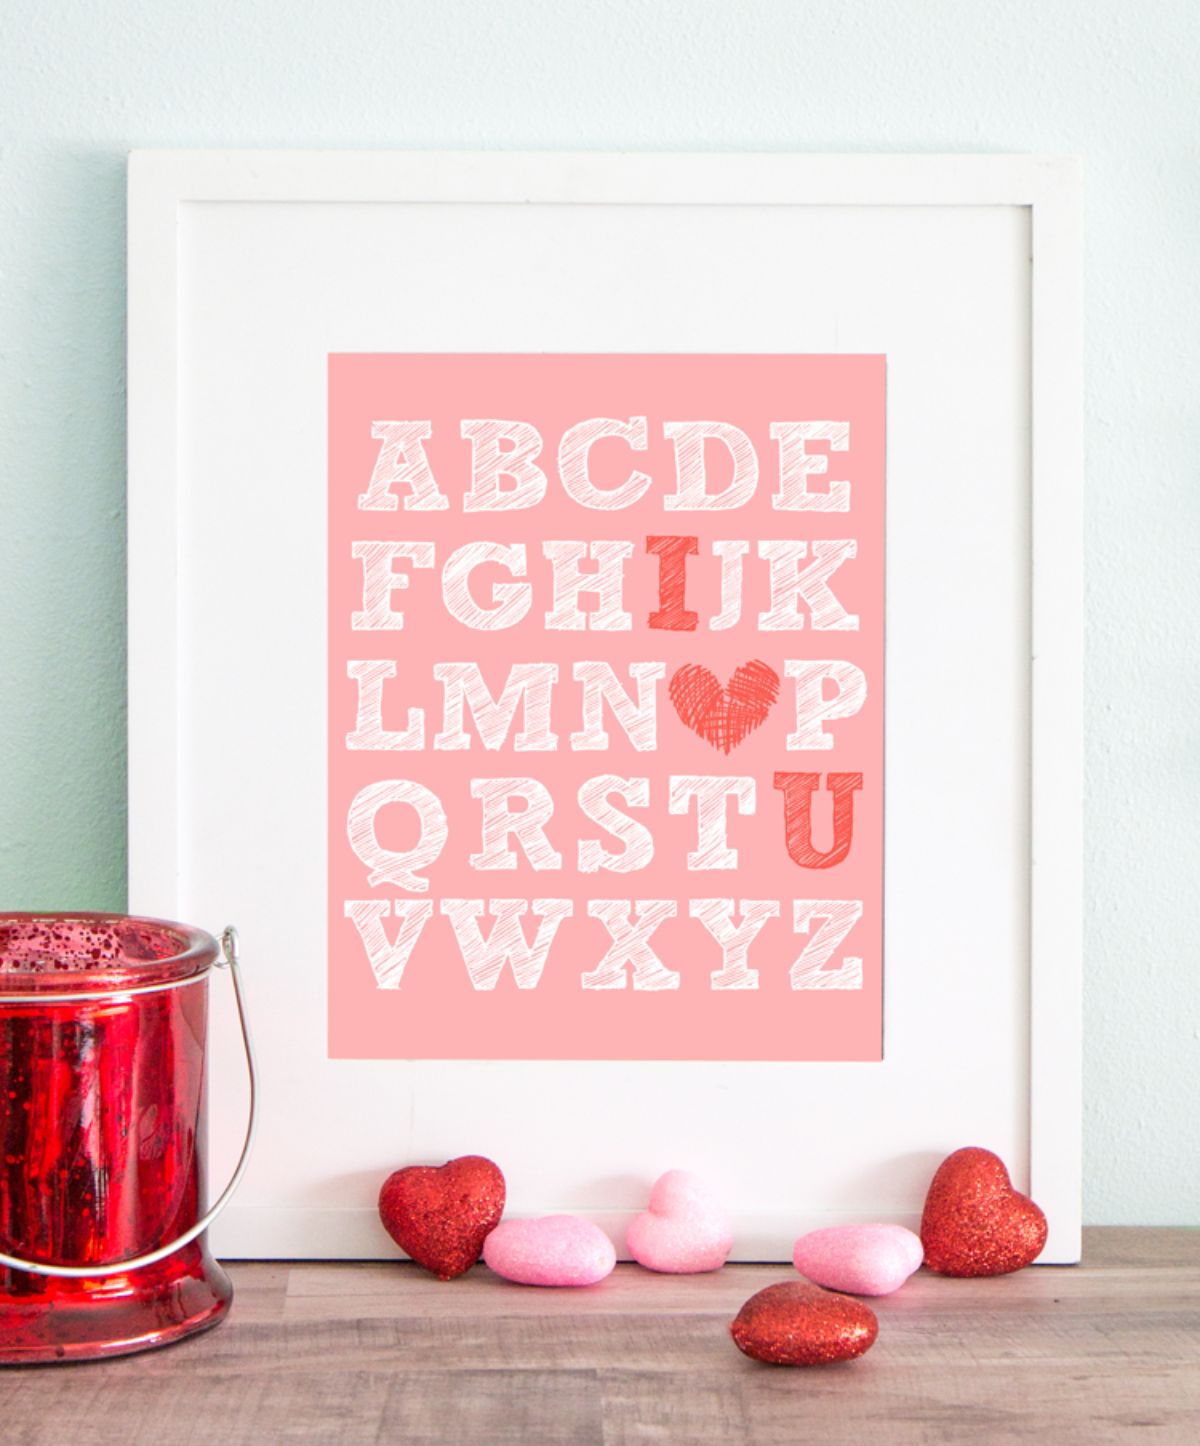 A white framed print sits on a wooden table. The background of the print is pink and the alphabet runs down the page. I and U are in red, and O is shaped like a red heart.